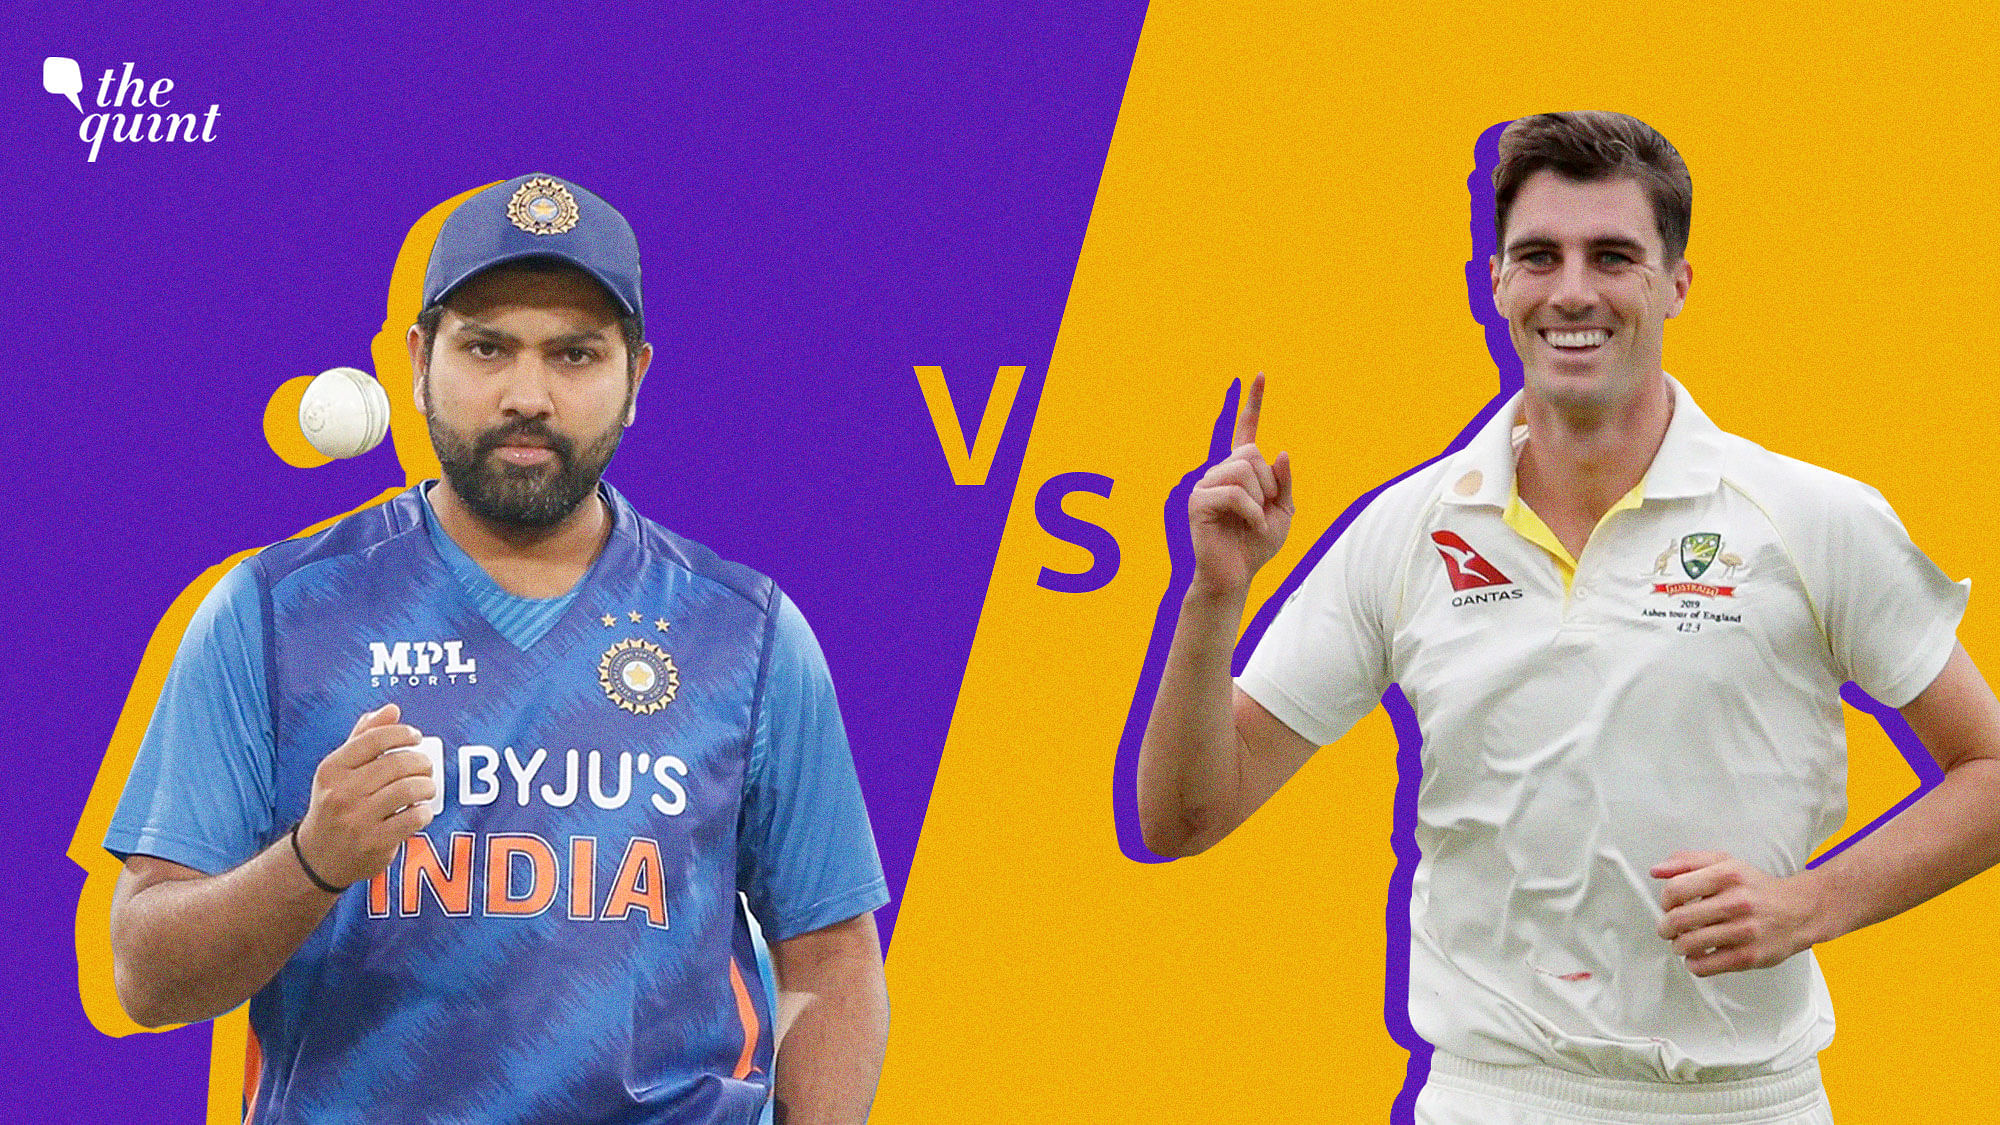 WI vs IND Test Series 2023 Date, Venue, Schedule and Live Streaming Details